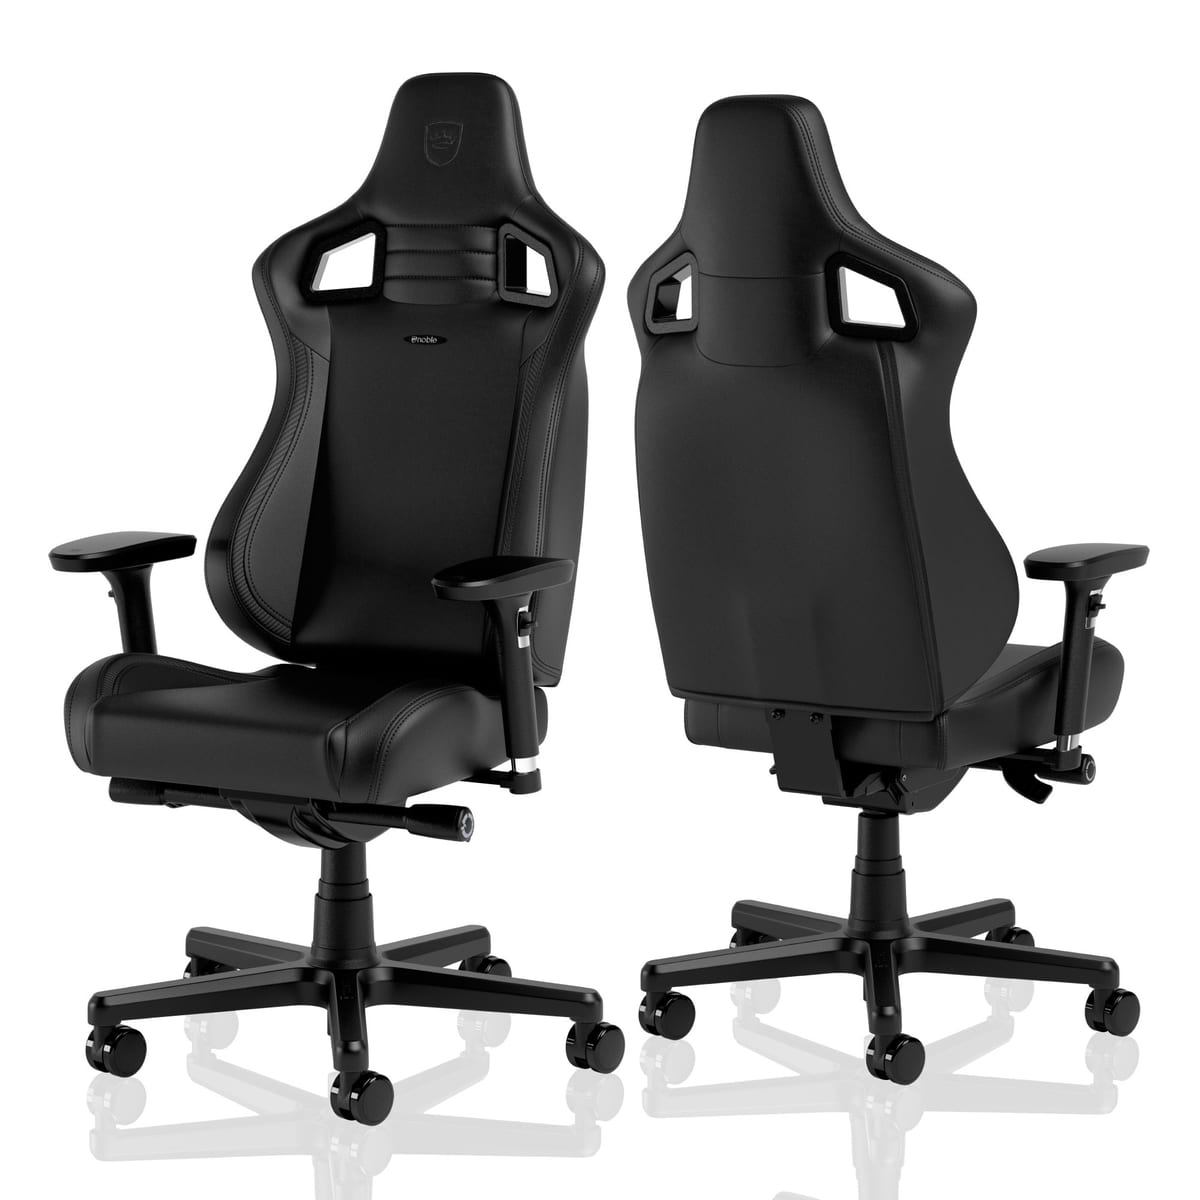 noblechairs(ノーブルチェアーズ)「EPIC COMPACT」２